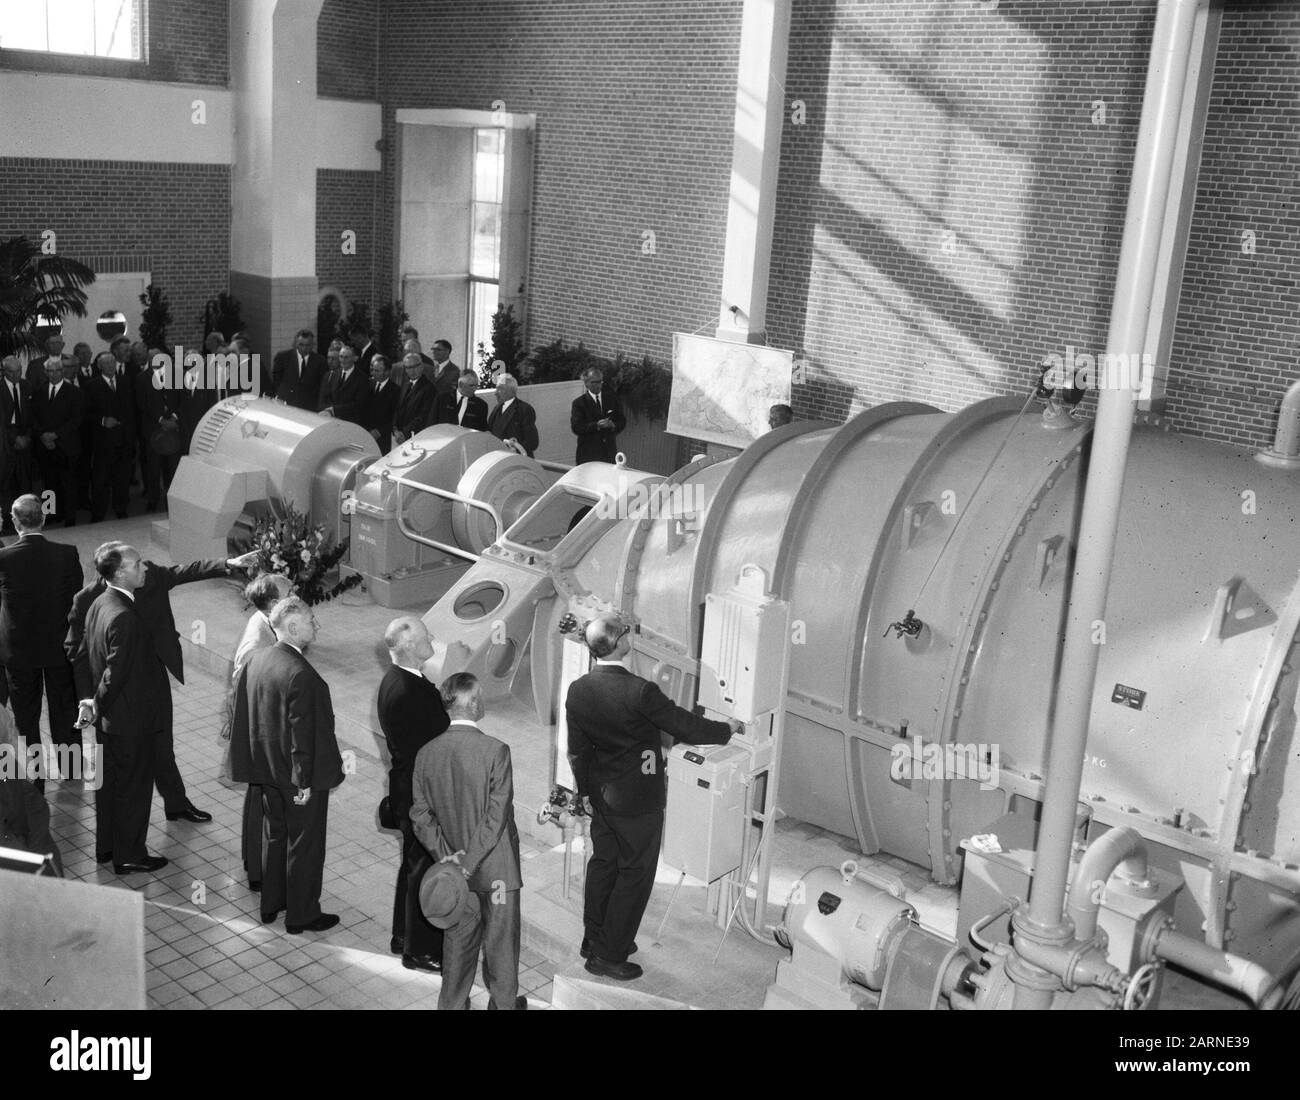 Fourth pump of pumping station Zeeburg officially in use by Mrs Van Holthe to Echten van Notten, overhand of the fourth pump pumping station Zeeburg Date: September 14, 1965 Keywords: ground Personal name: Zeeburg Stock Photo